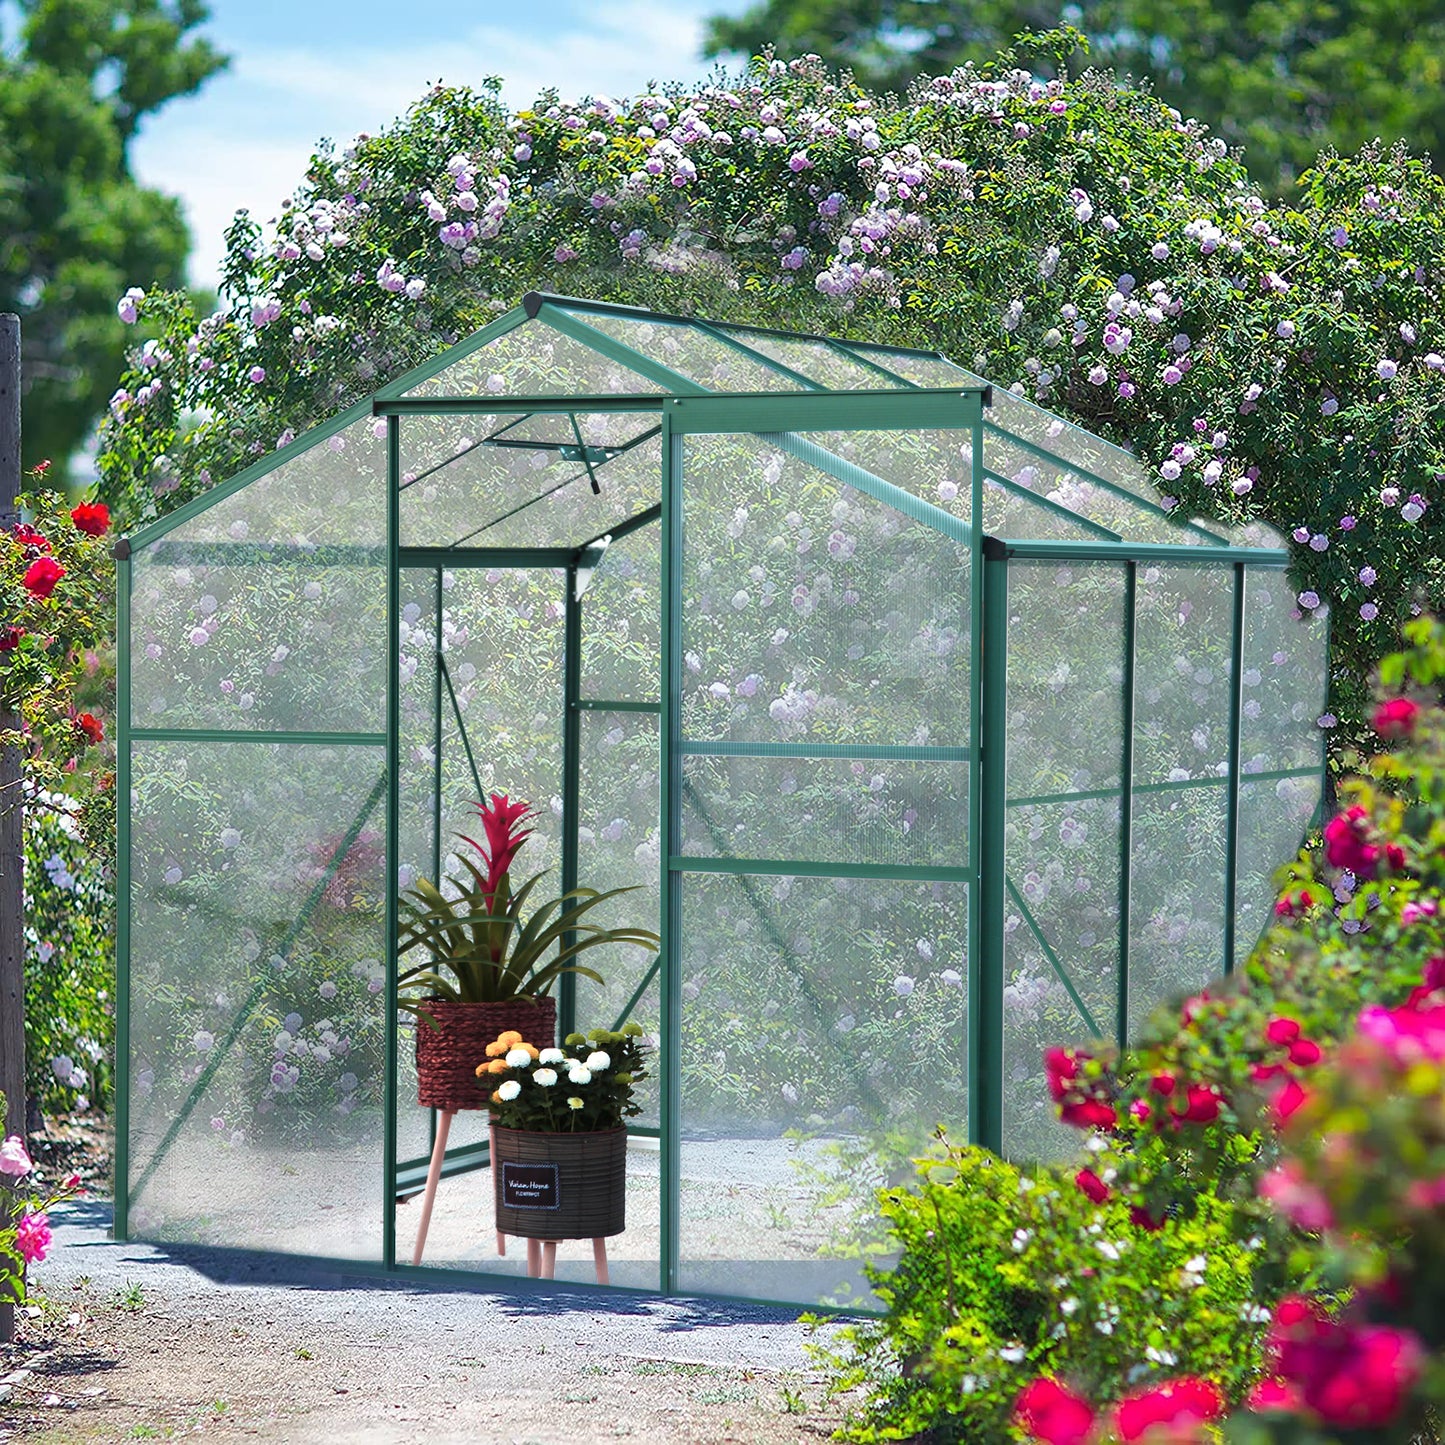 8' x 6' Walk-in Greenhouse for Outdoor, Garden Greenhouse with Metal Frame, Sliding Door, Adjustable Roof Vent and Rain Gutter, Backyard Greenhouse for Plants in Winter, Y004